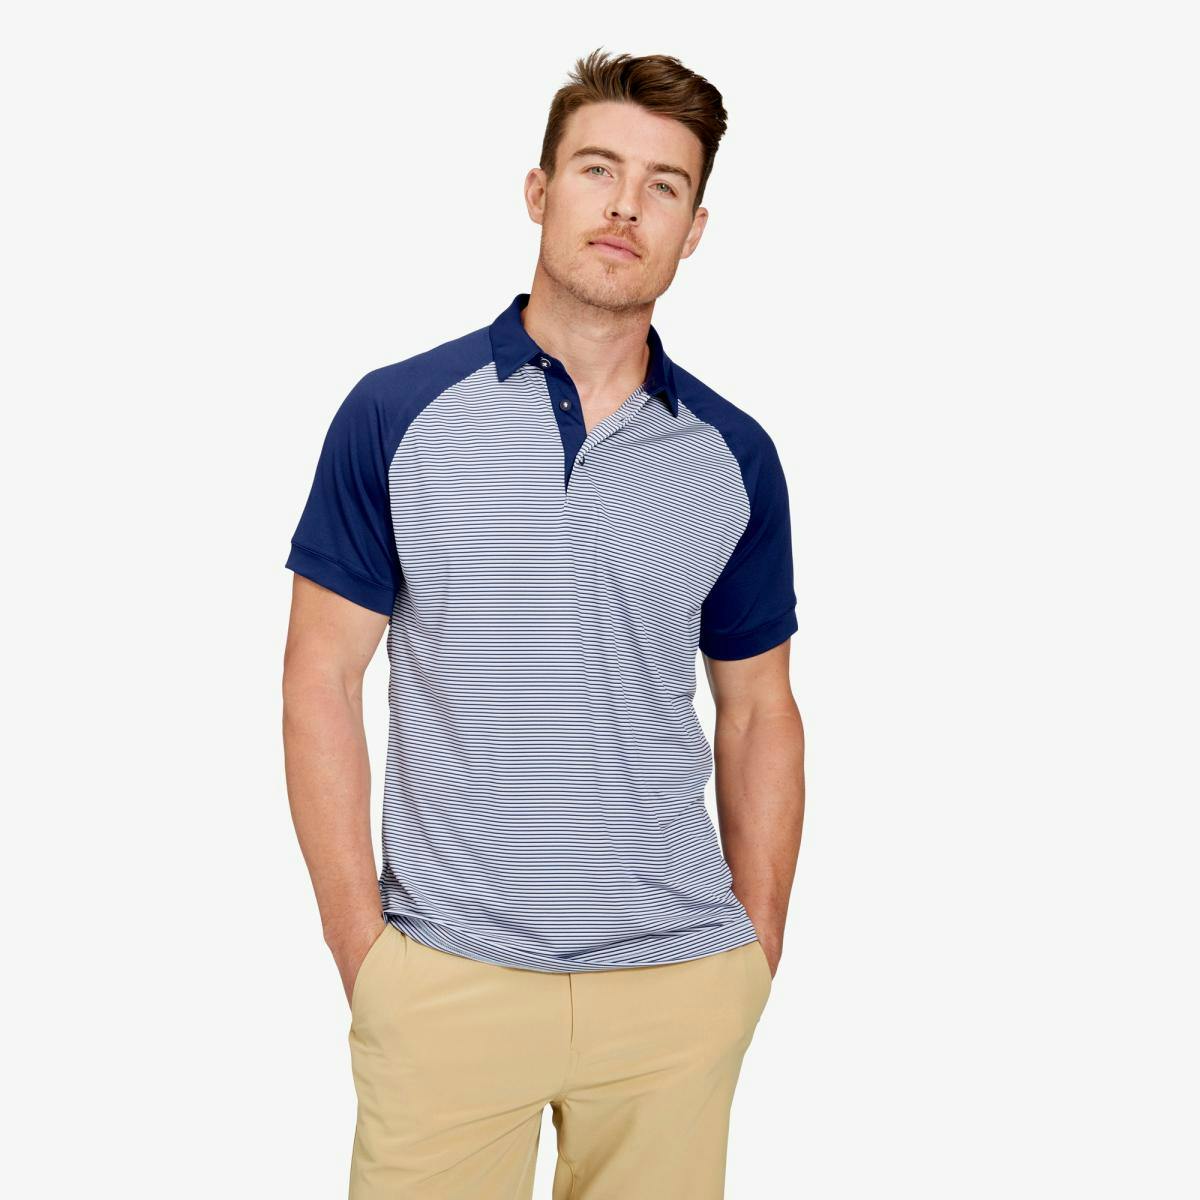 Versa Clubhouse Polo - Product Image 1